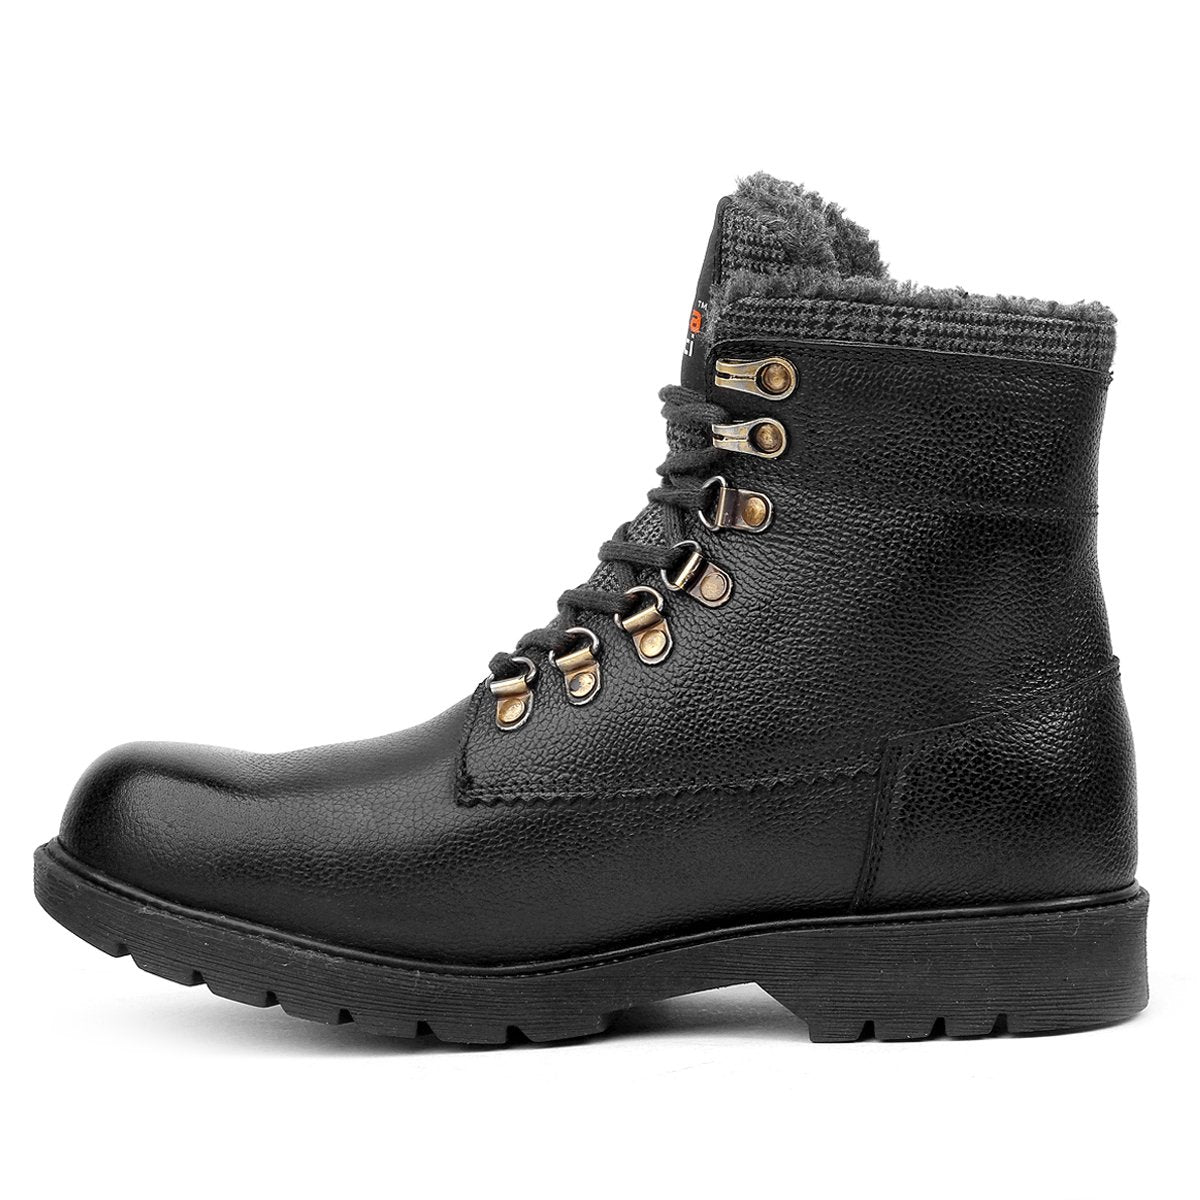 waterproof boots for men, mens snow boots, high top boots, genuine leather boots